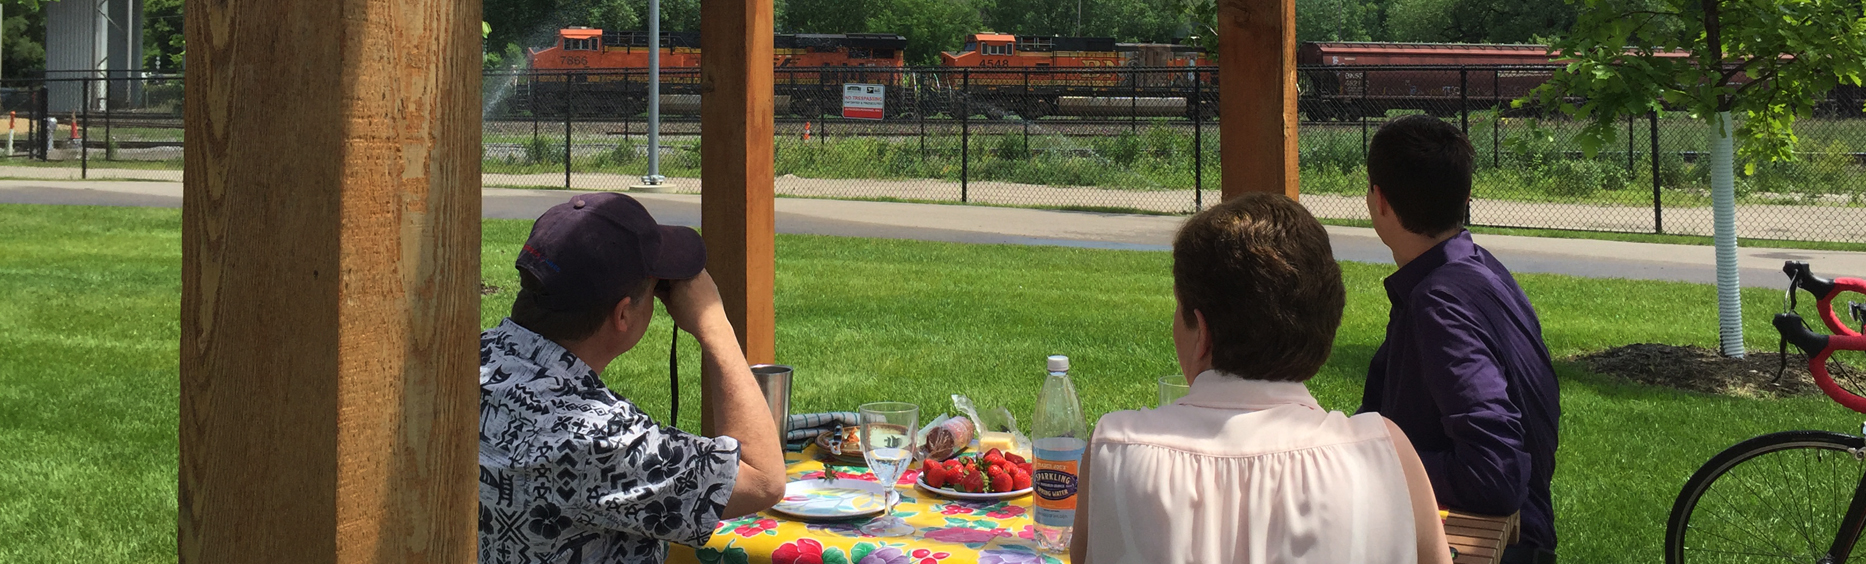 People having a picnic outside by the train tracks